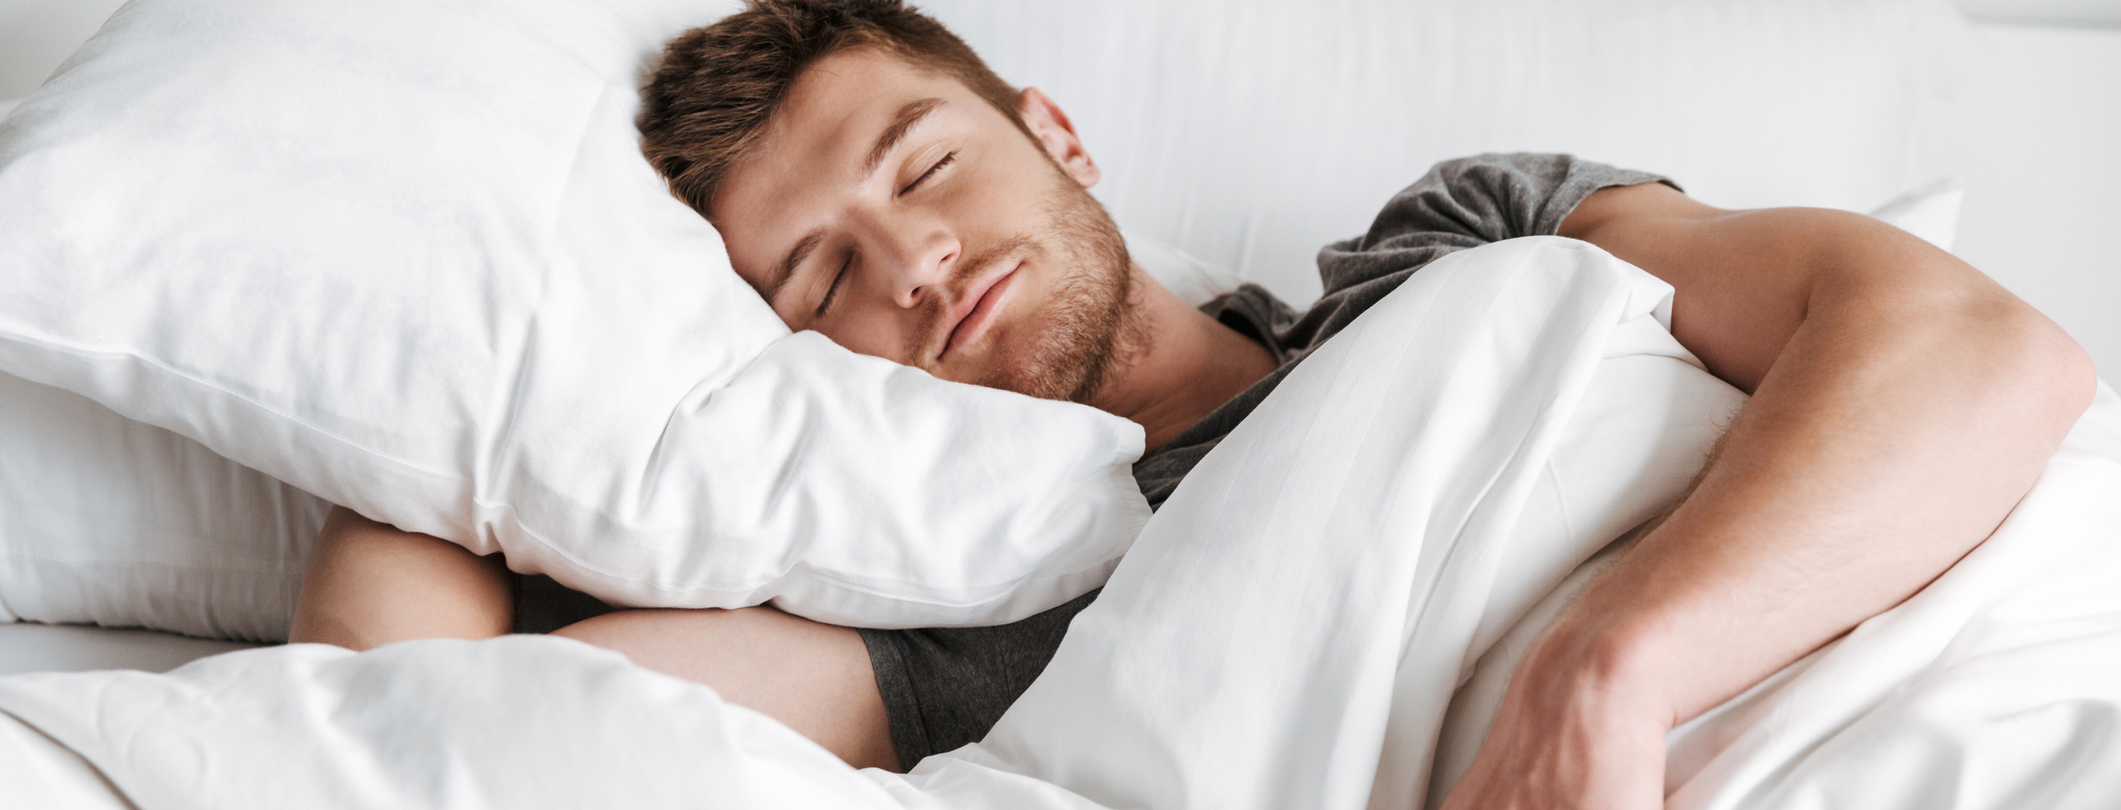 Adult Man Sleeping in bed on his side using comfy pillows